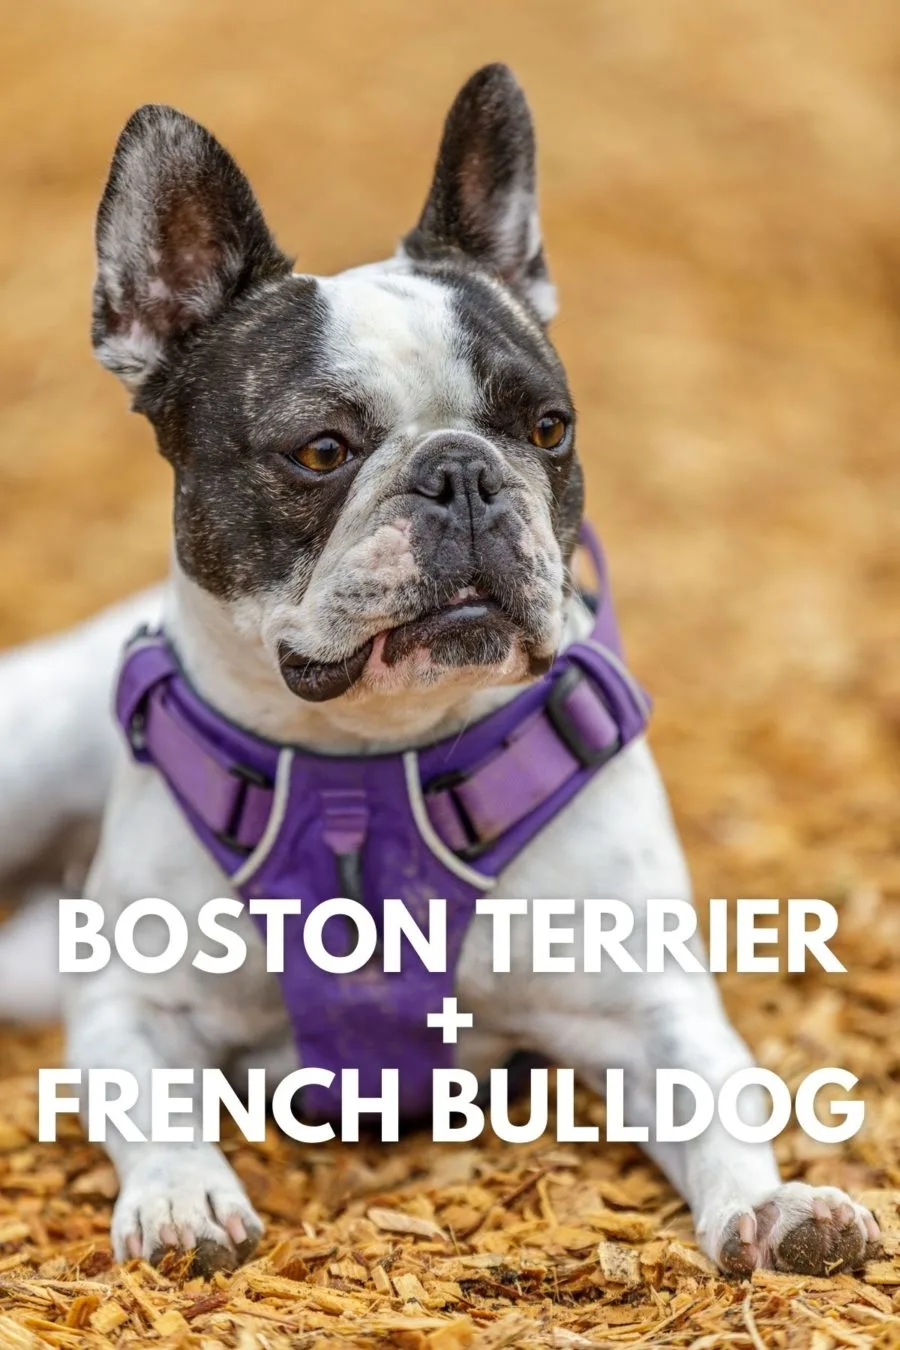 Frenchton -- French Bulldog and Boston Terrier cross or hybrid mixed dog breeds